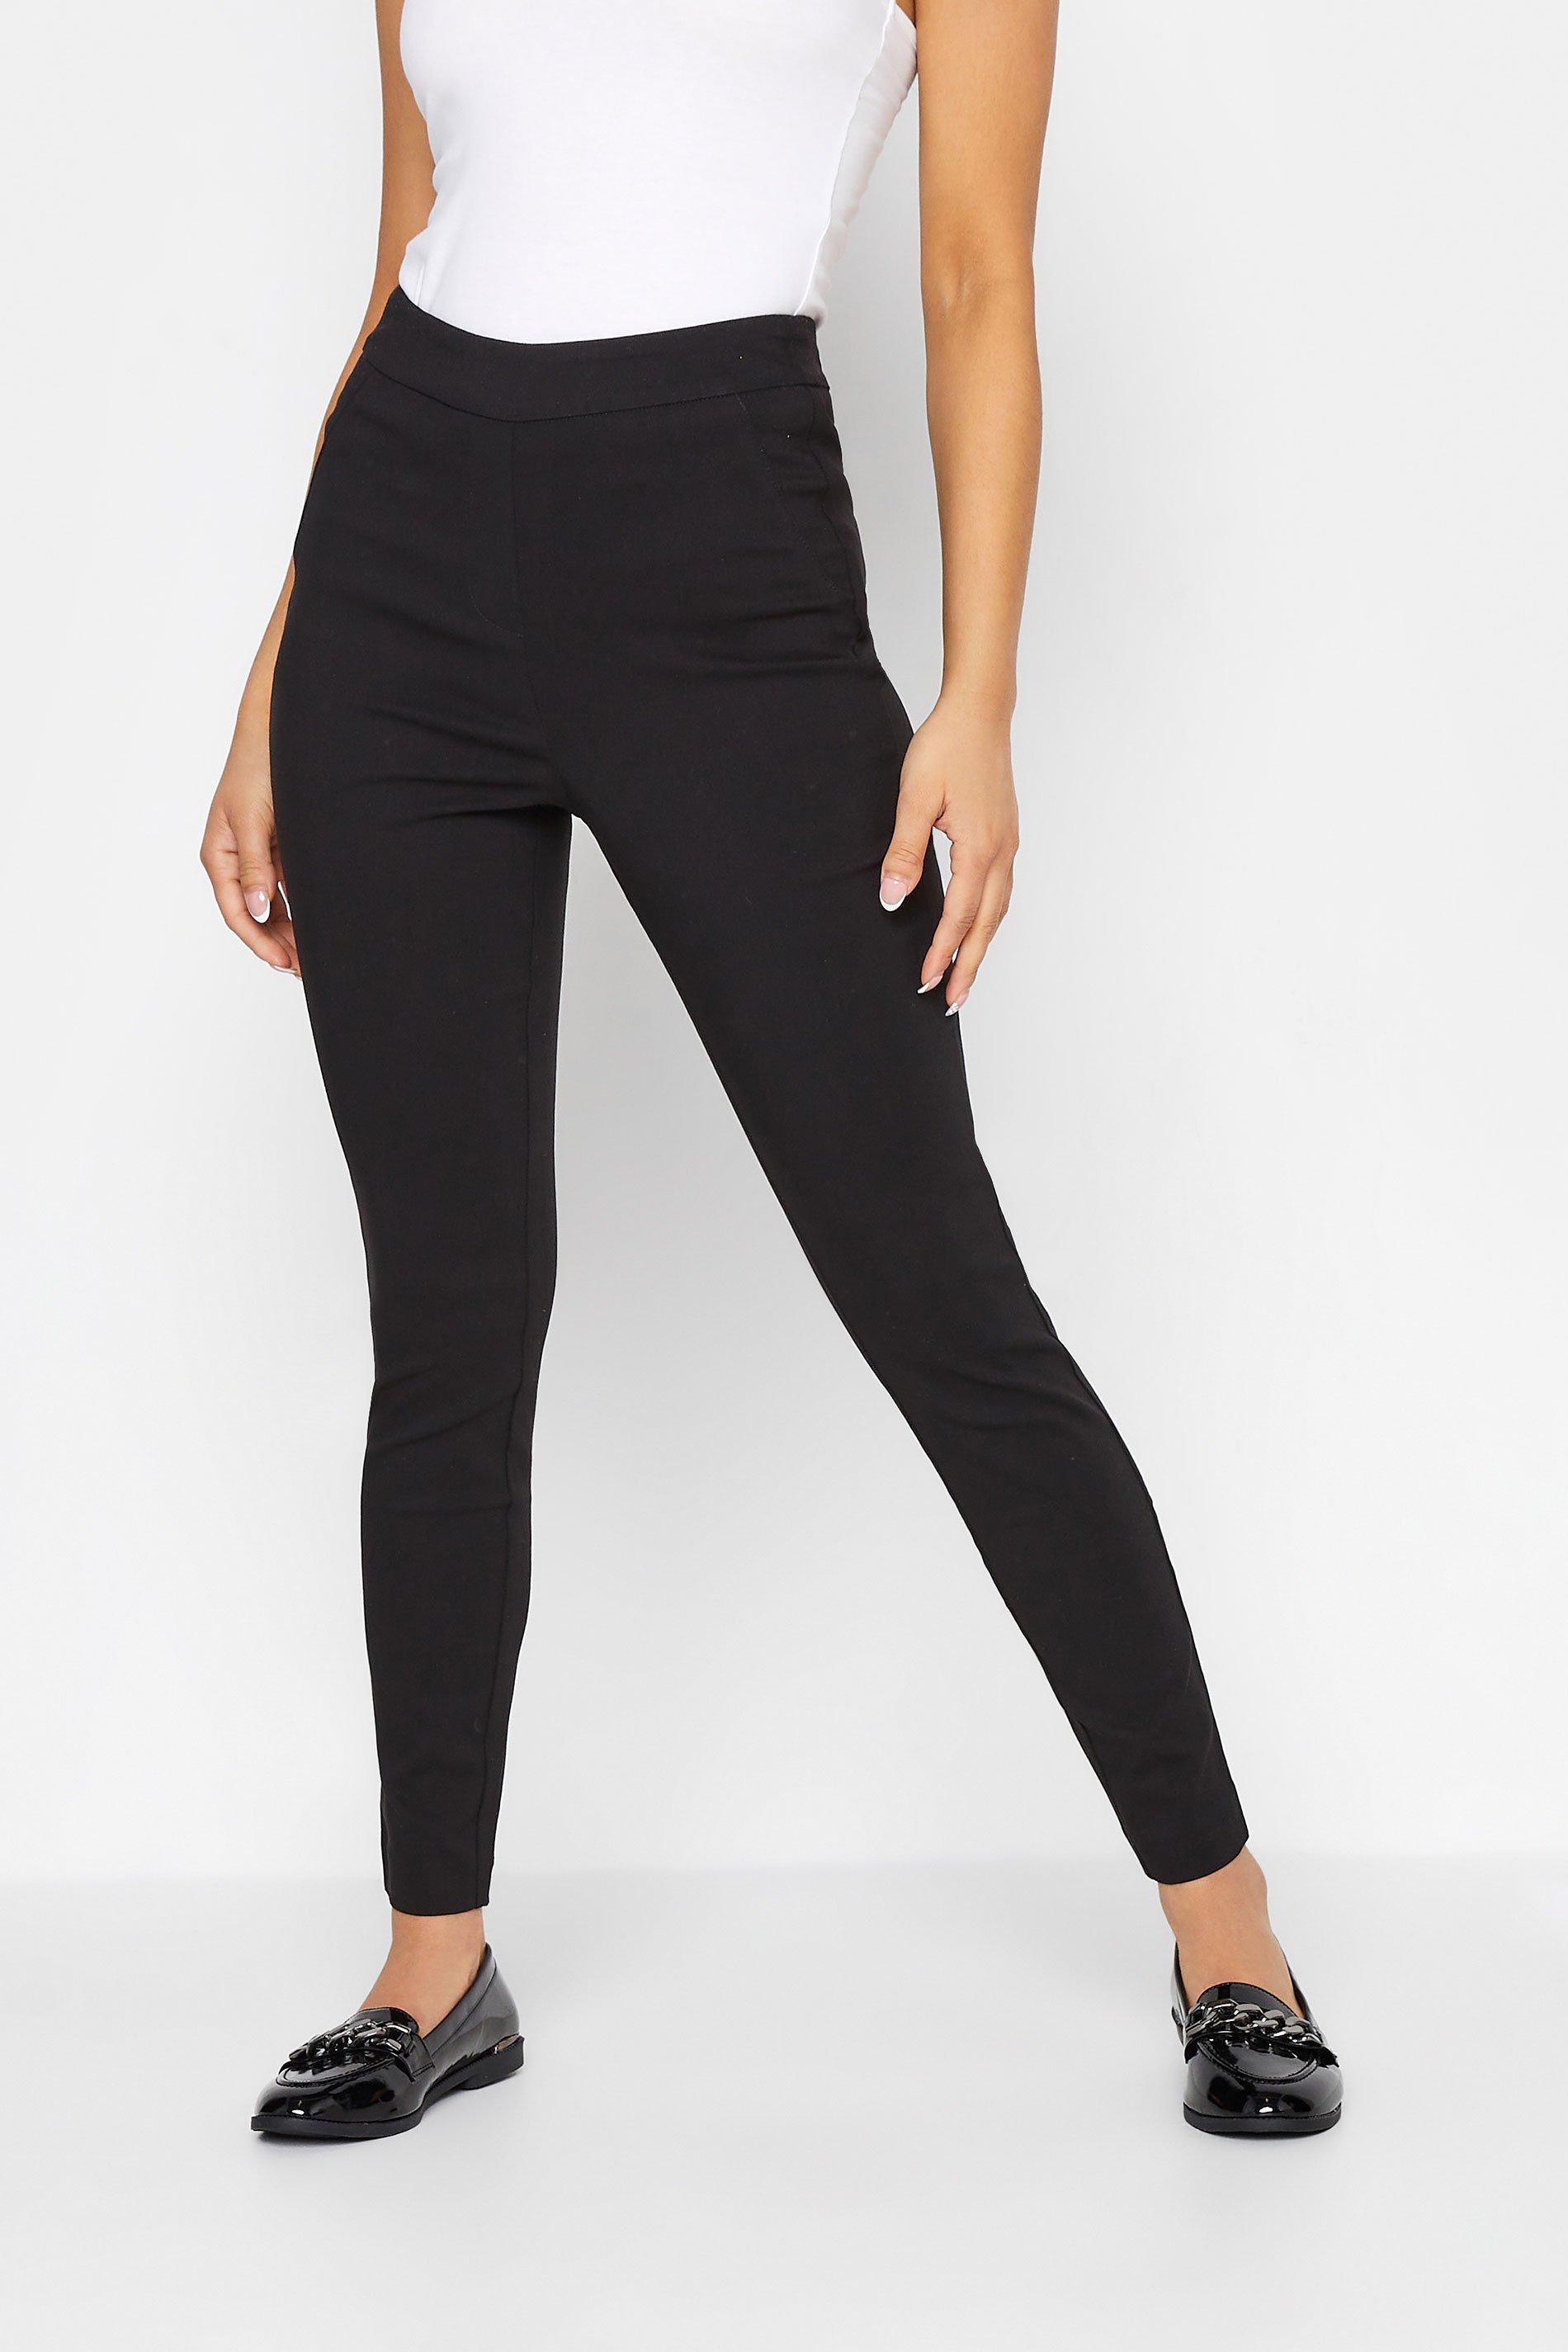 Buy Black Tailored Stretch Skinny Trousers from the Next UK online shop